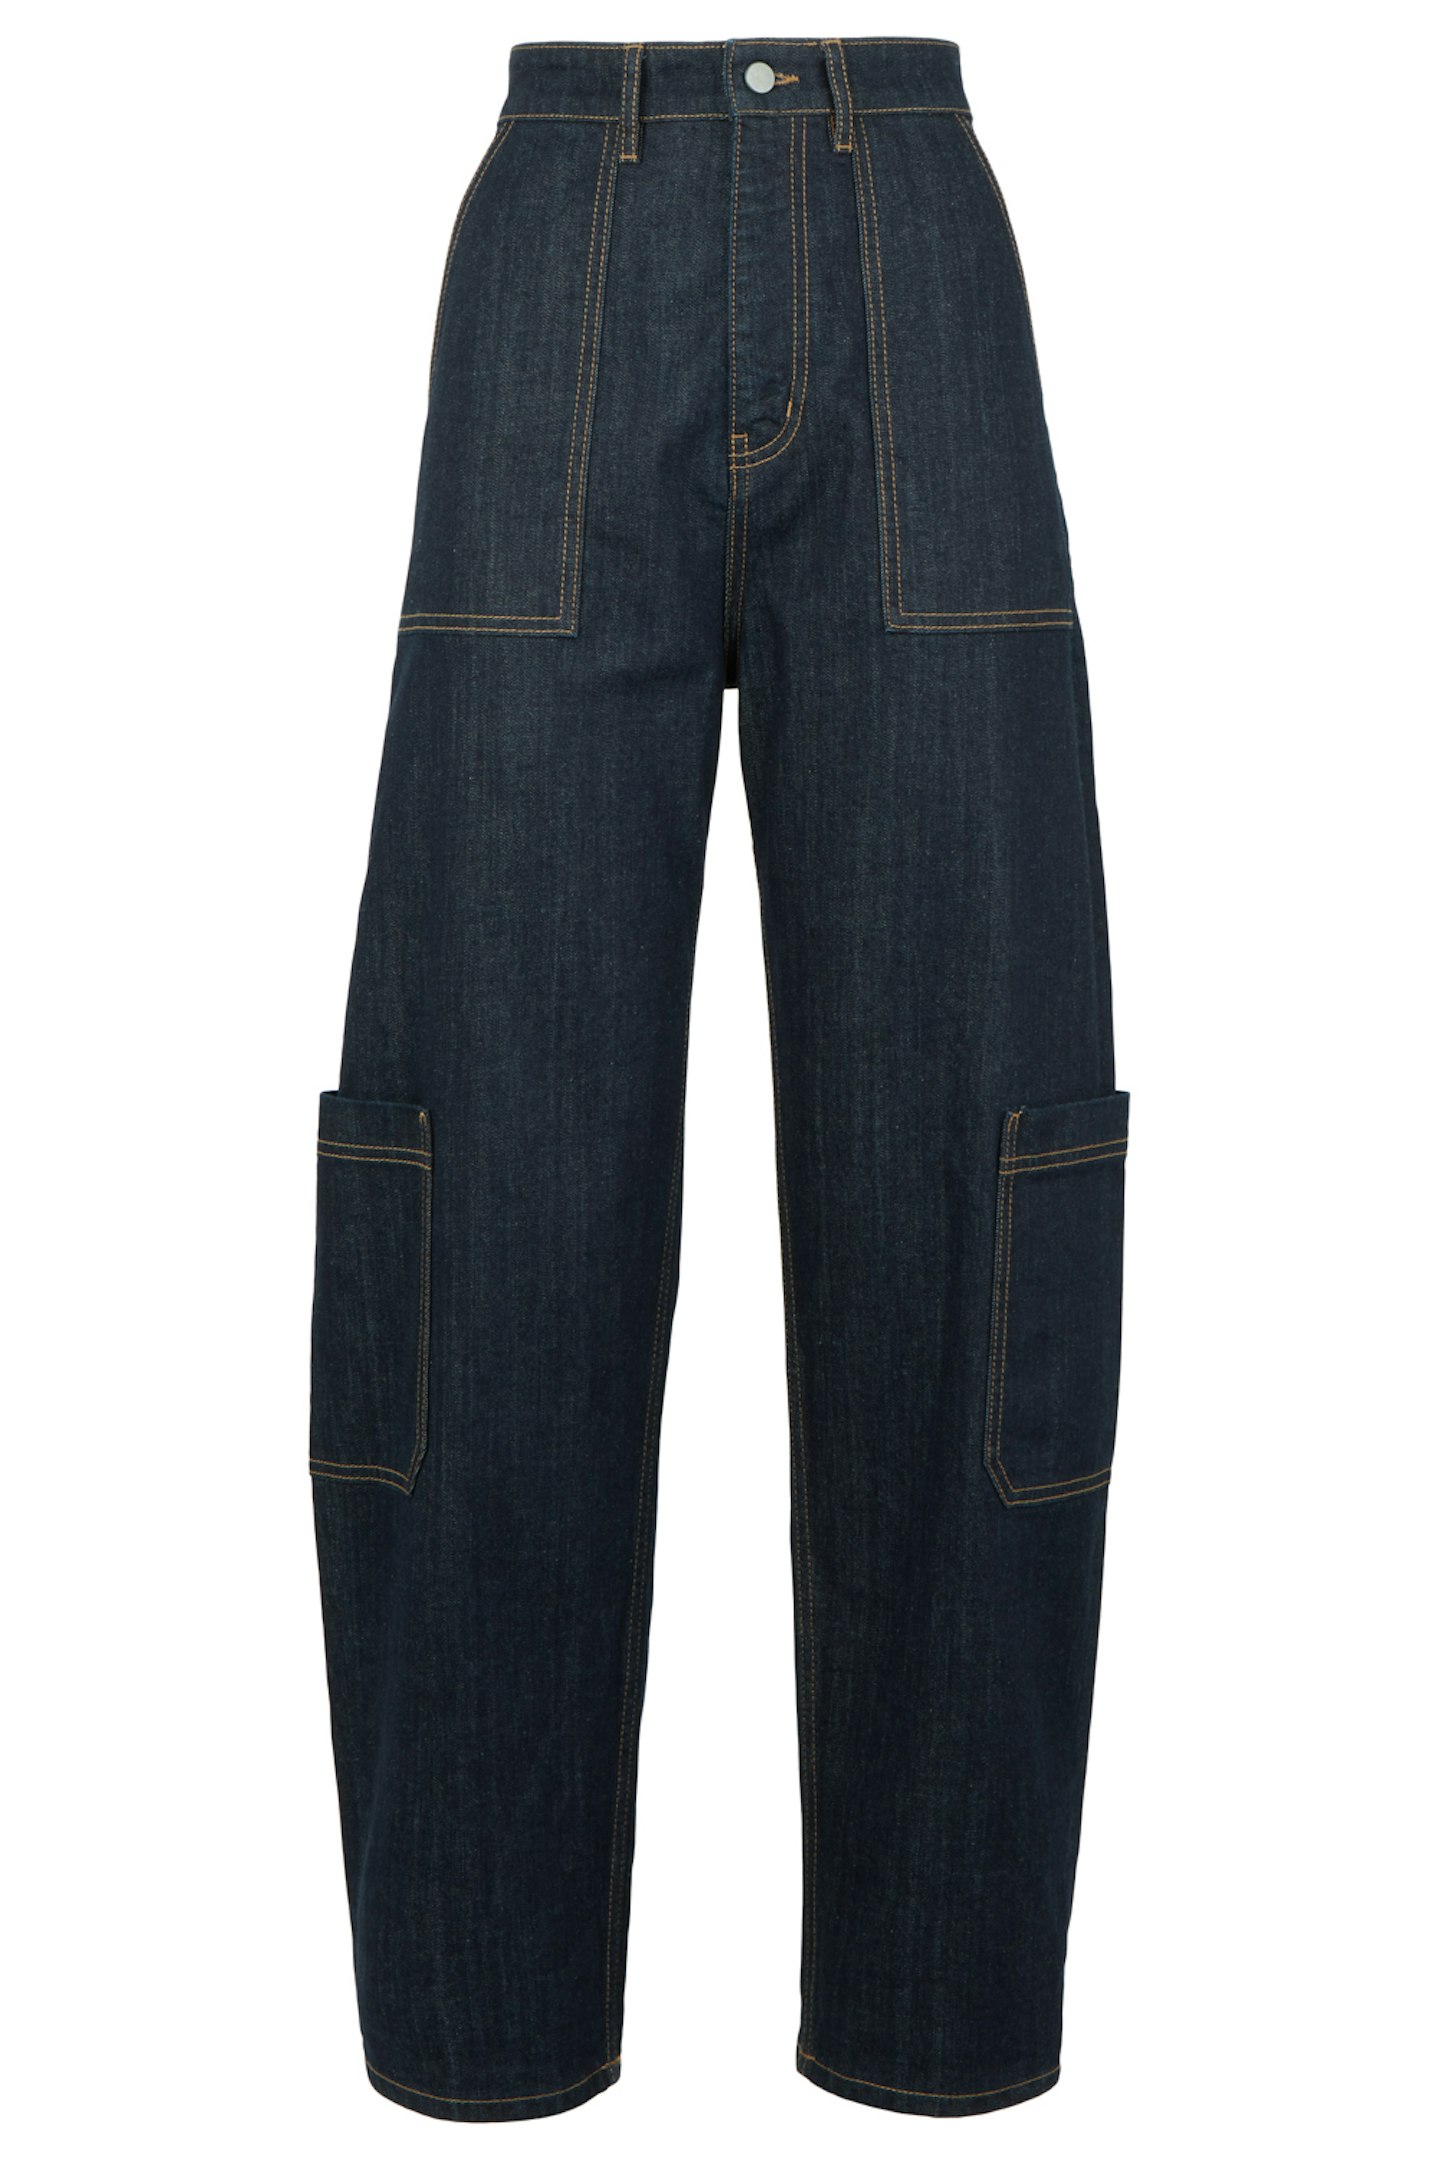 People Tree, Cargo Jeans, WAS £109 NOW £54.50